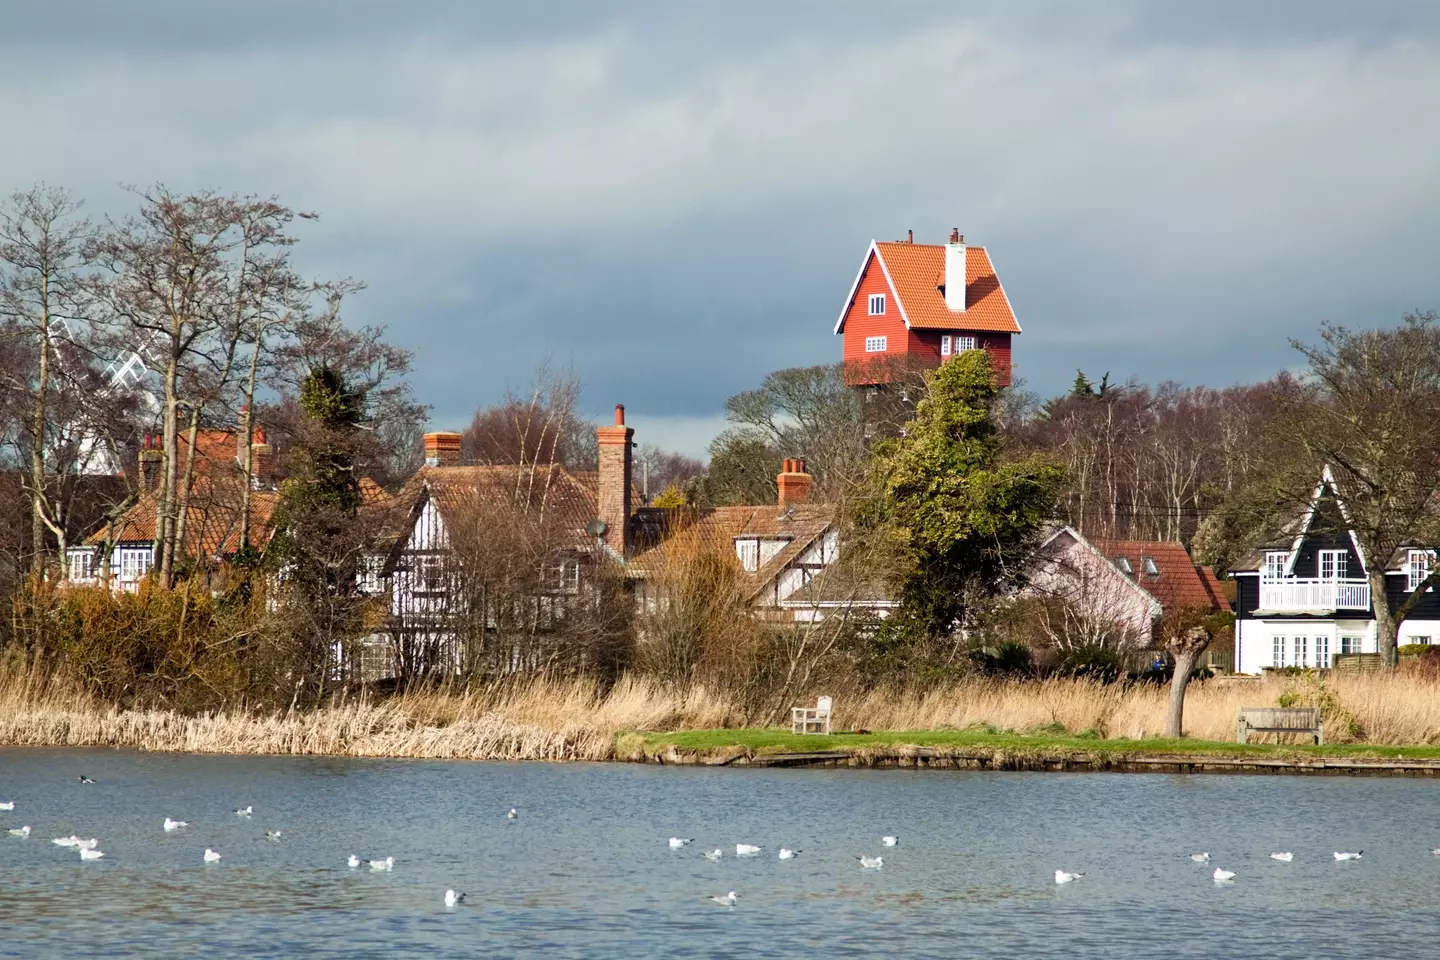 The House in the Clouds towers over the Suffolk village of Thorpeness.